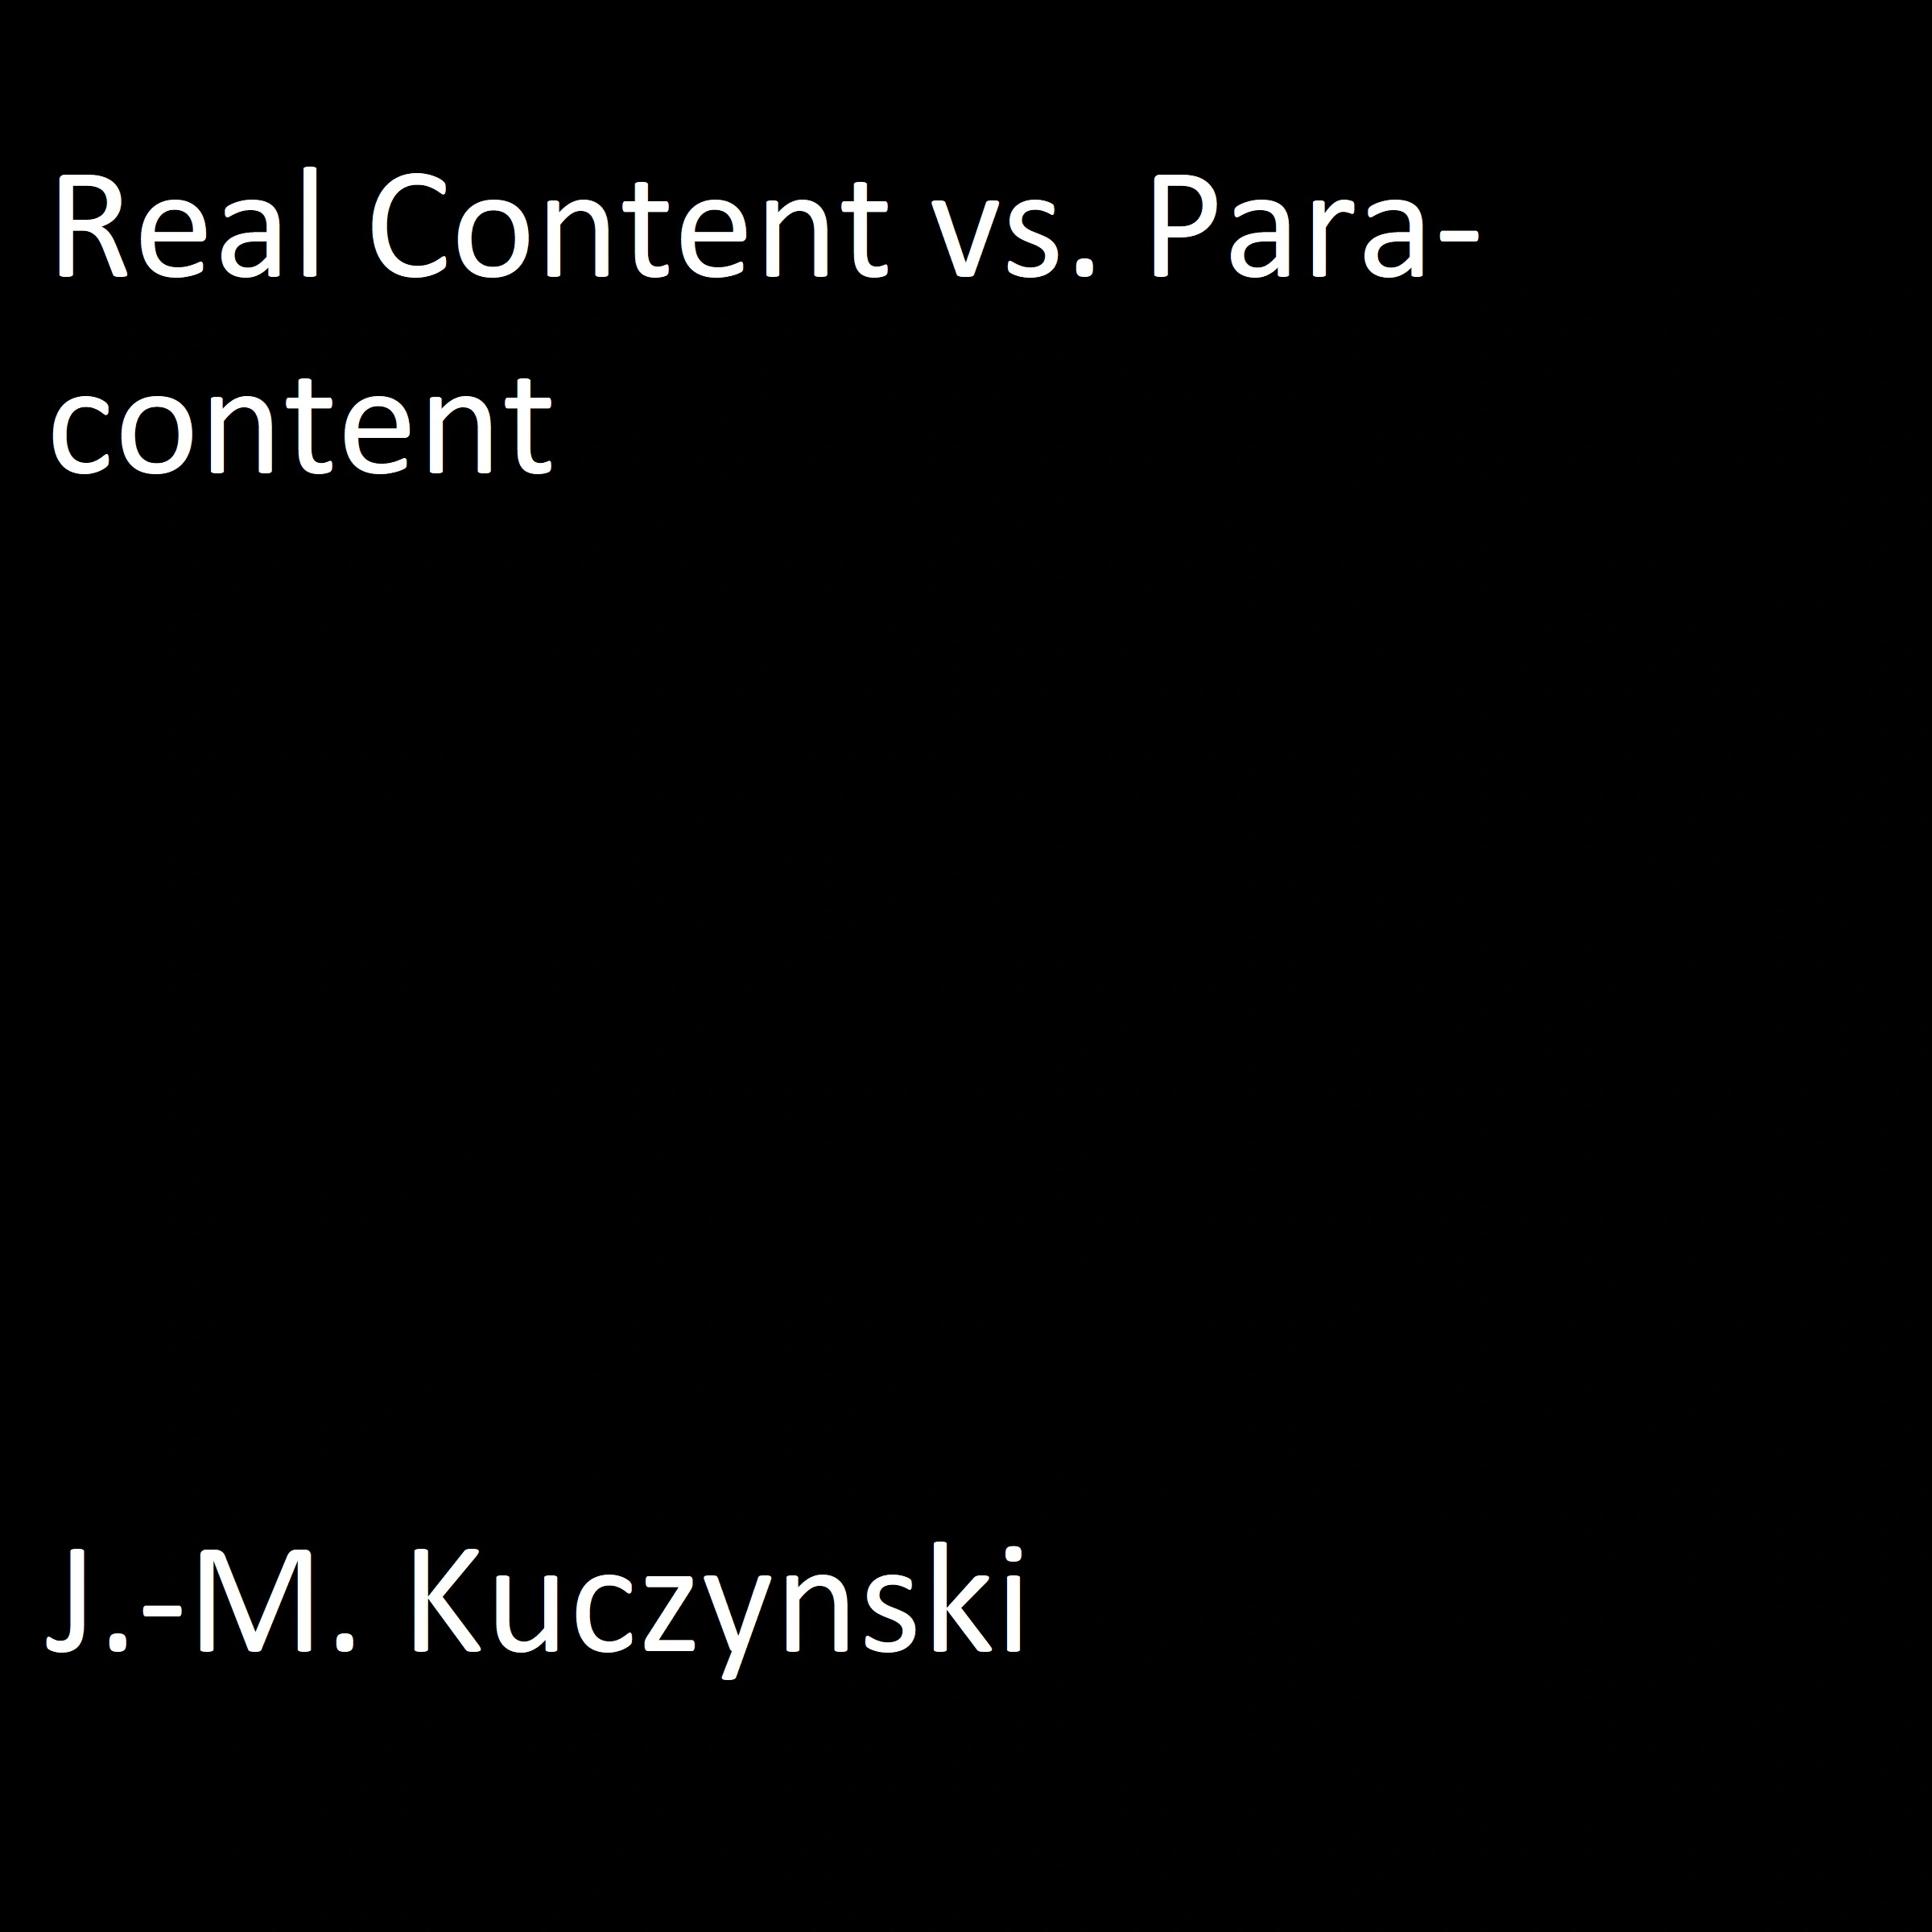 Real Content vs. Para-content Audiobook by J.-M. Kuczynski